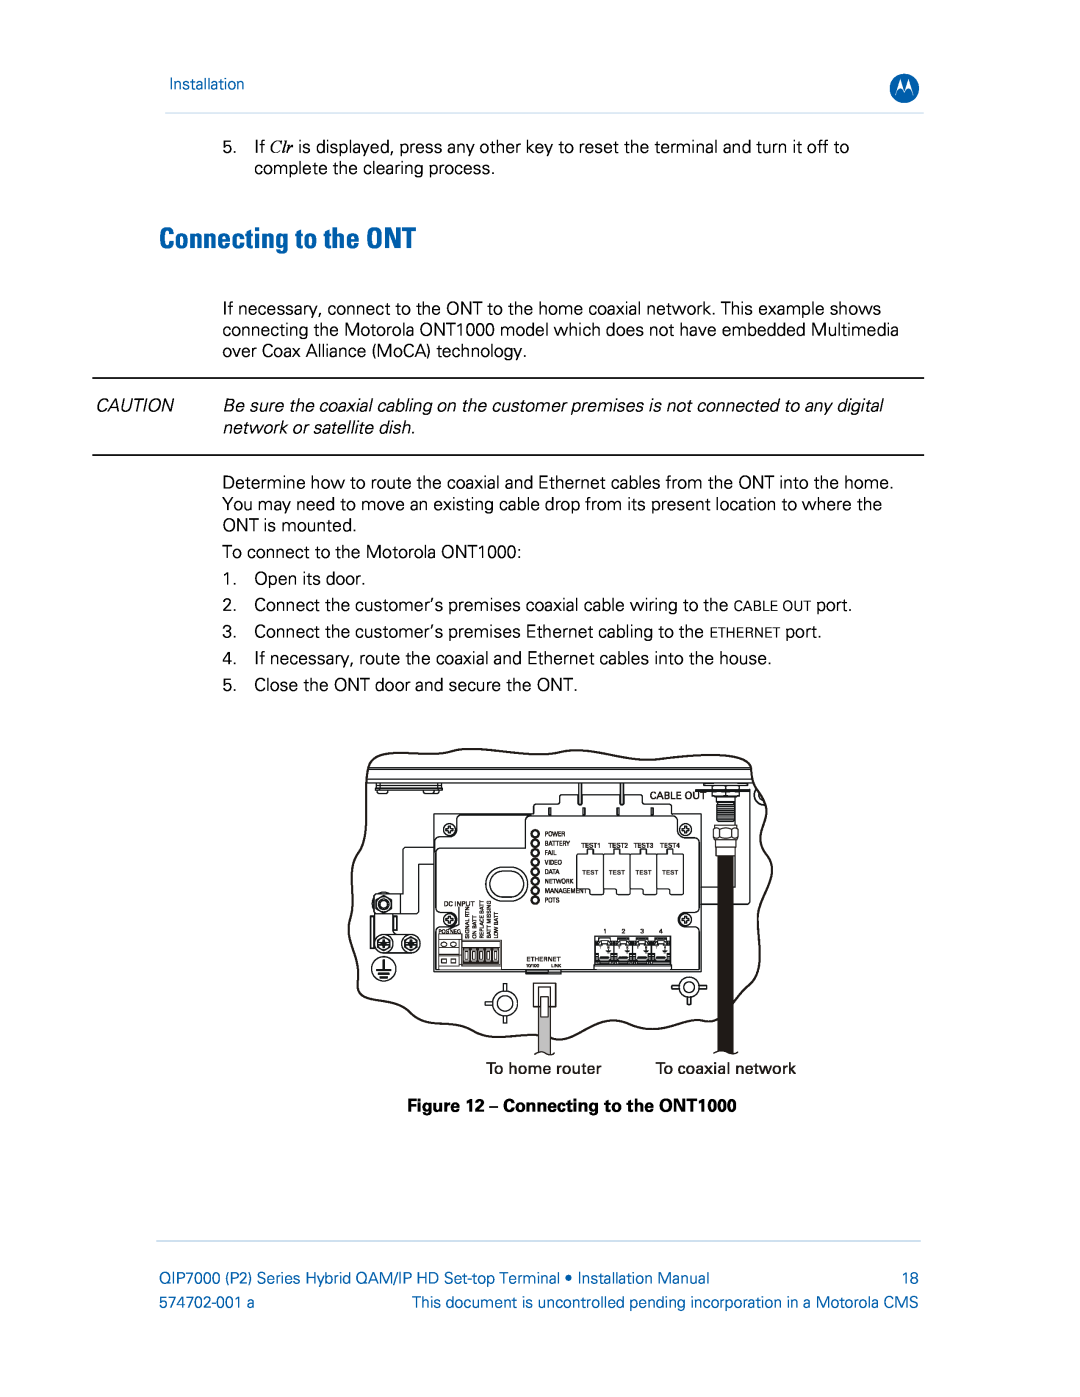 Motorola QIP7000 installation manual network or satellite dish, Connecting to the ONT1000 